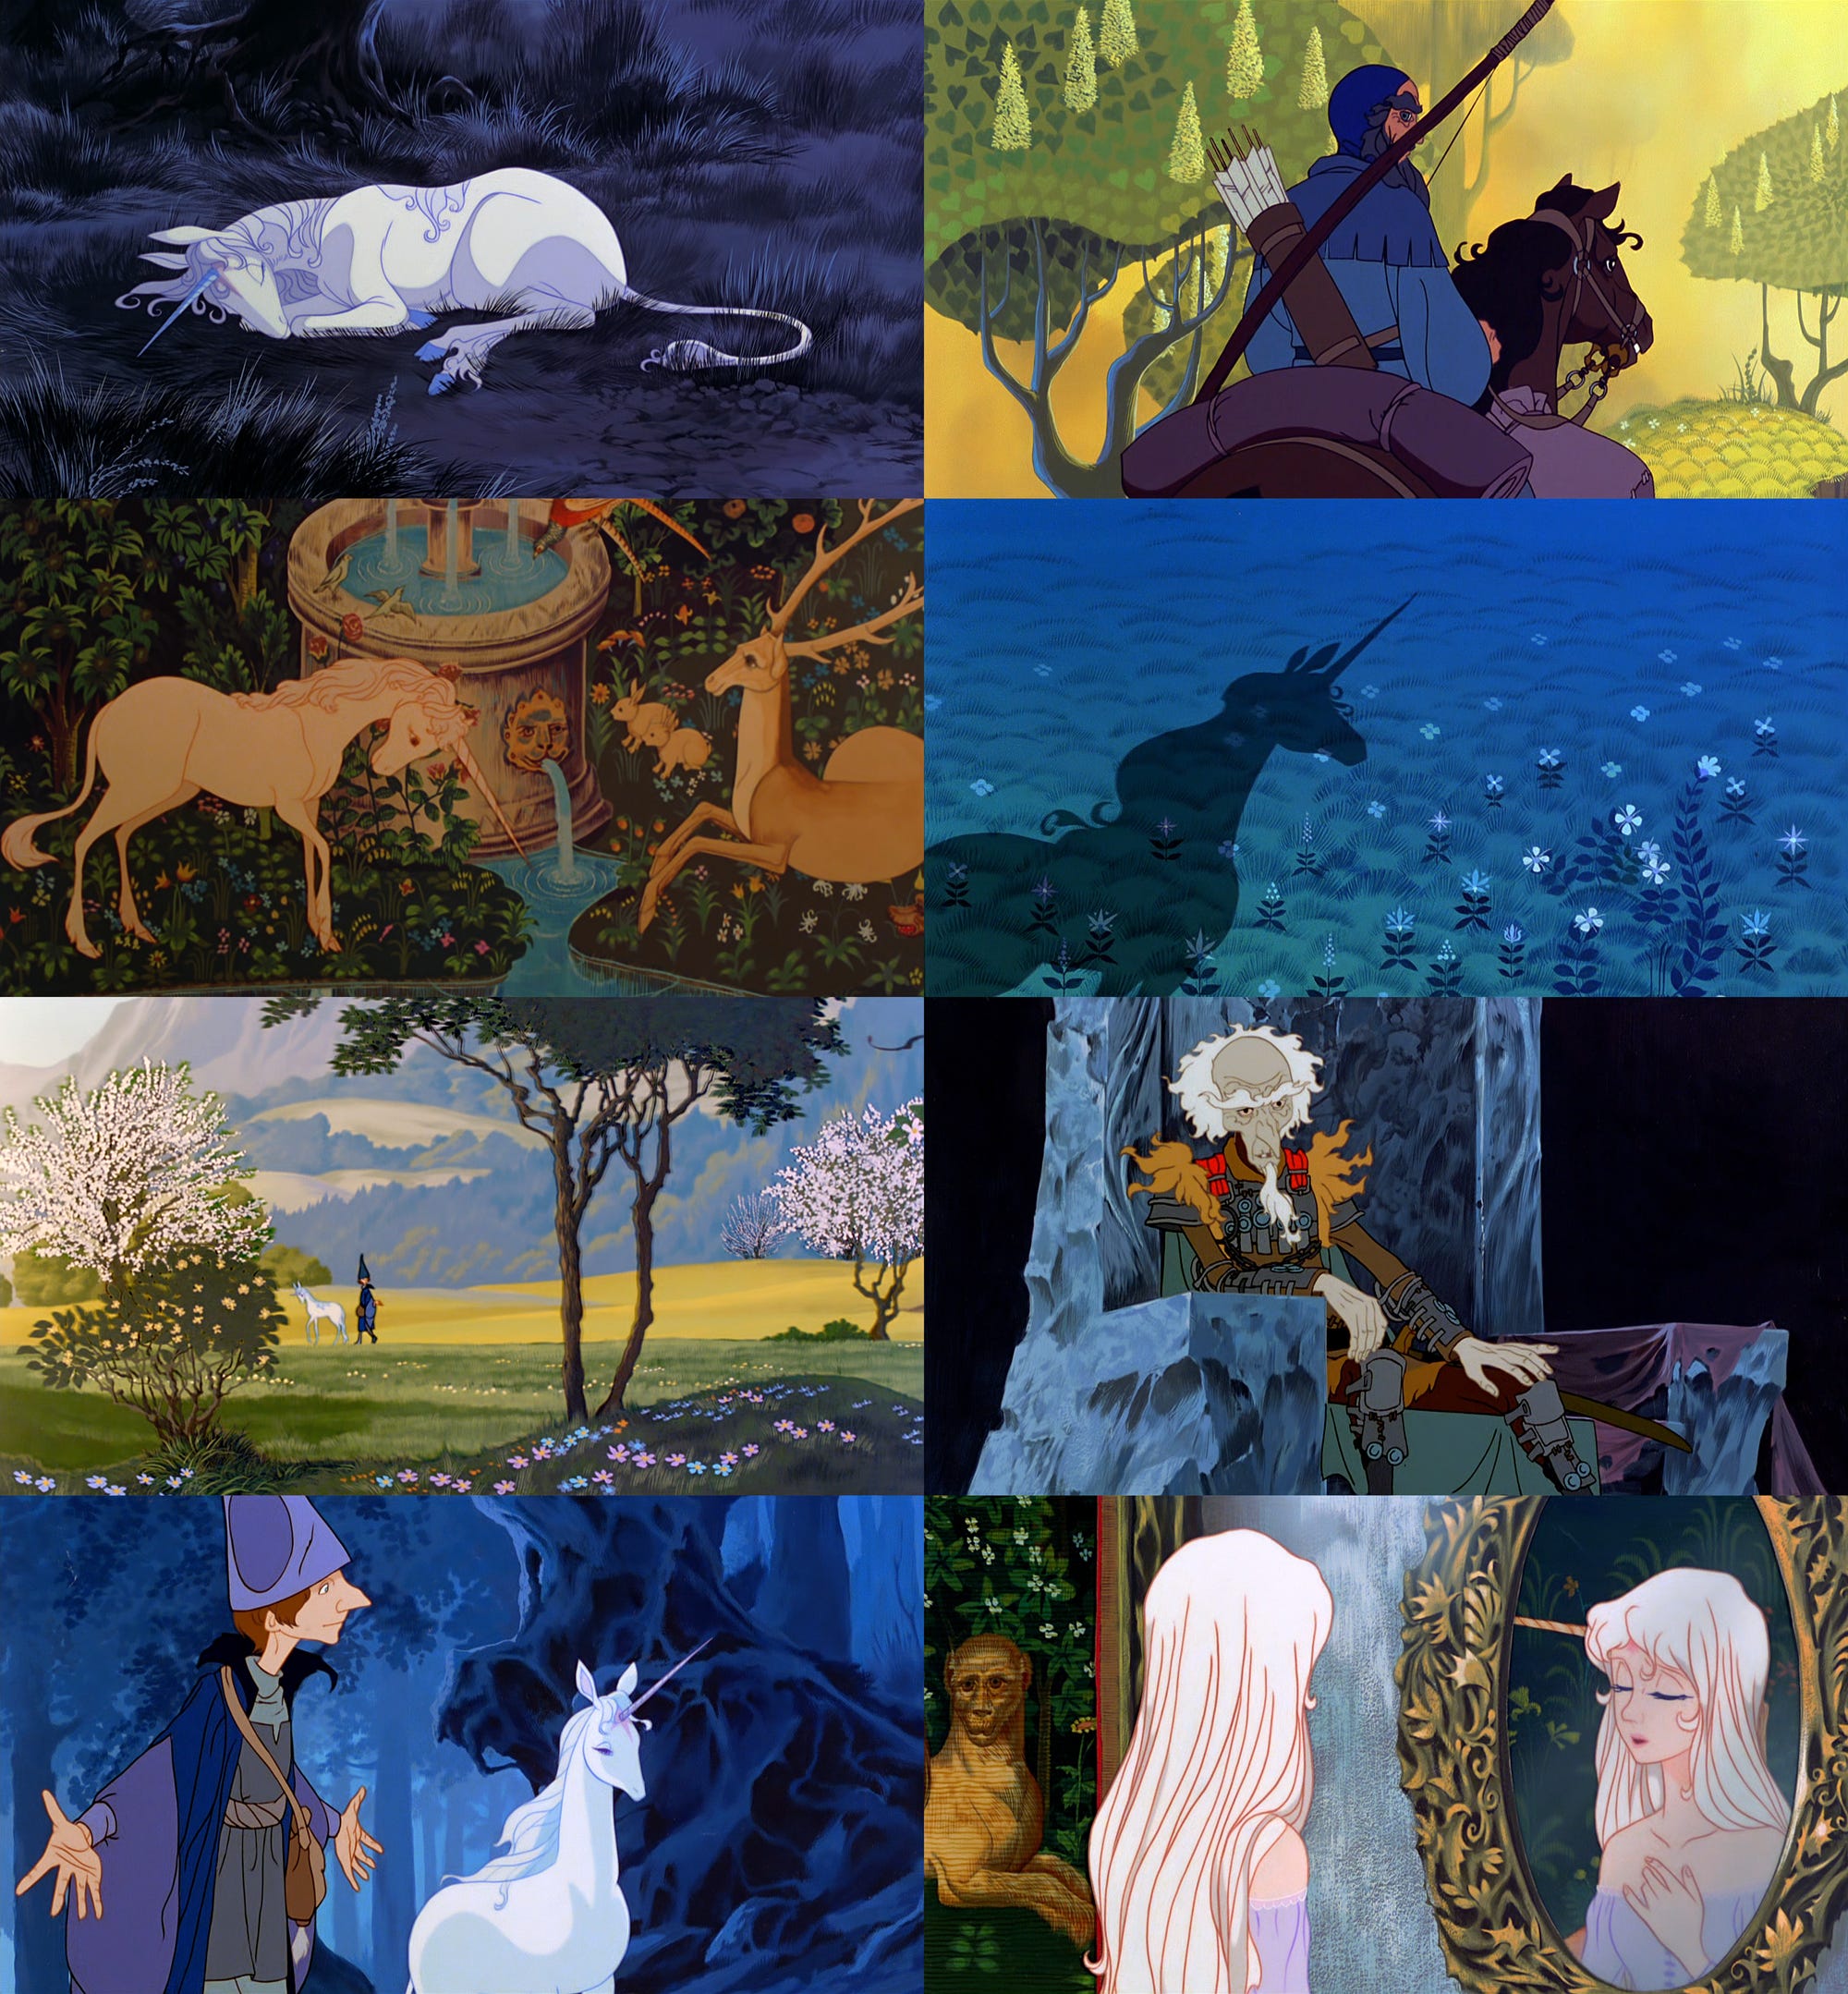 The Making of 'The Last Unicorn'